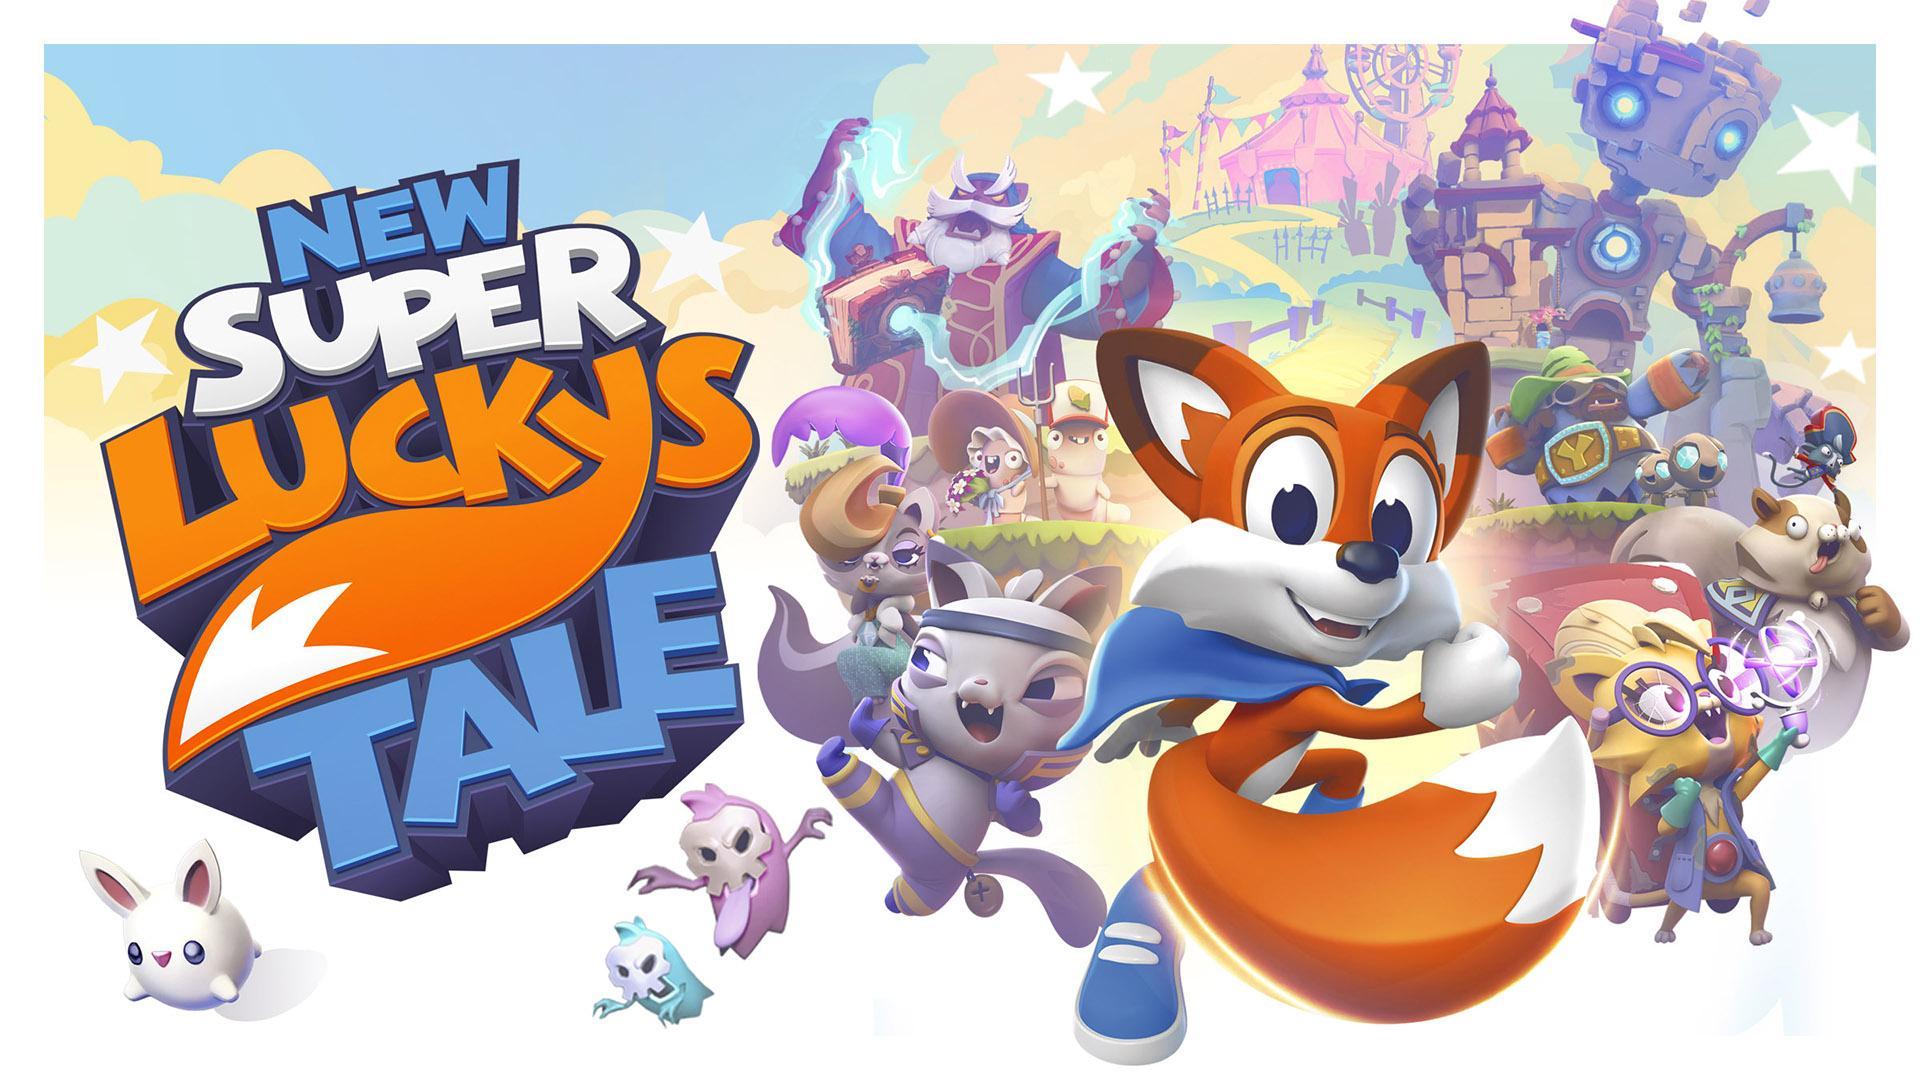 New Super Lucky's Tale Revealed During Nintendo Direct E3